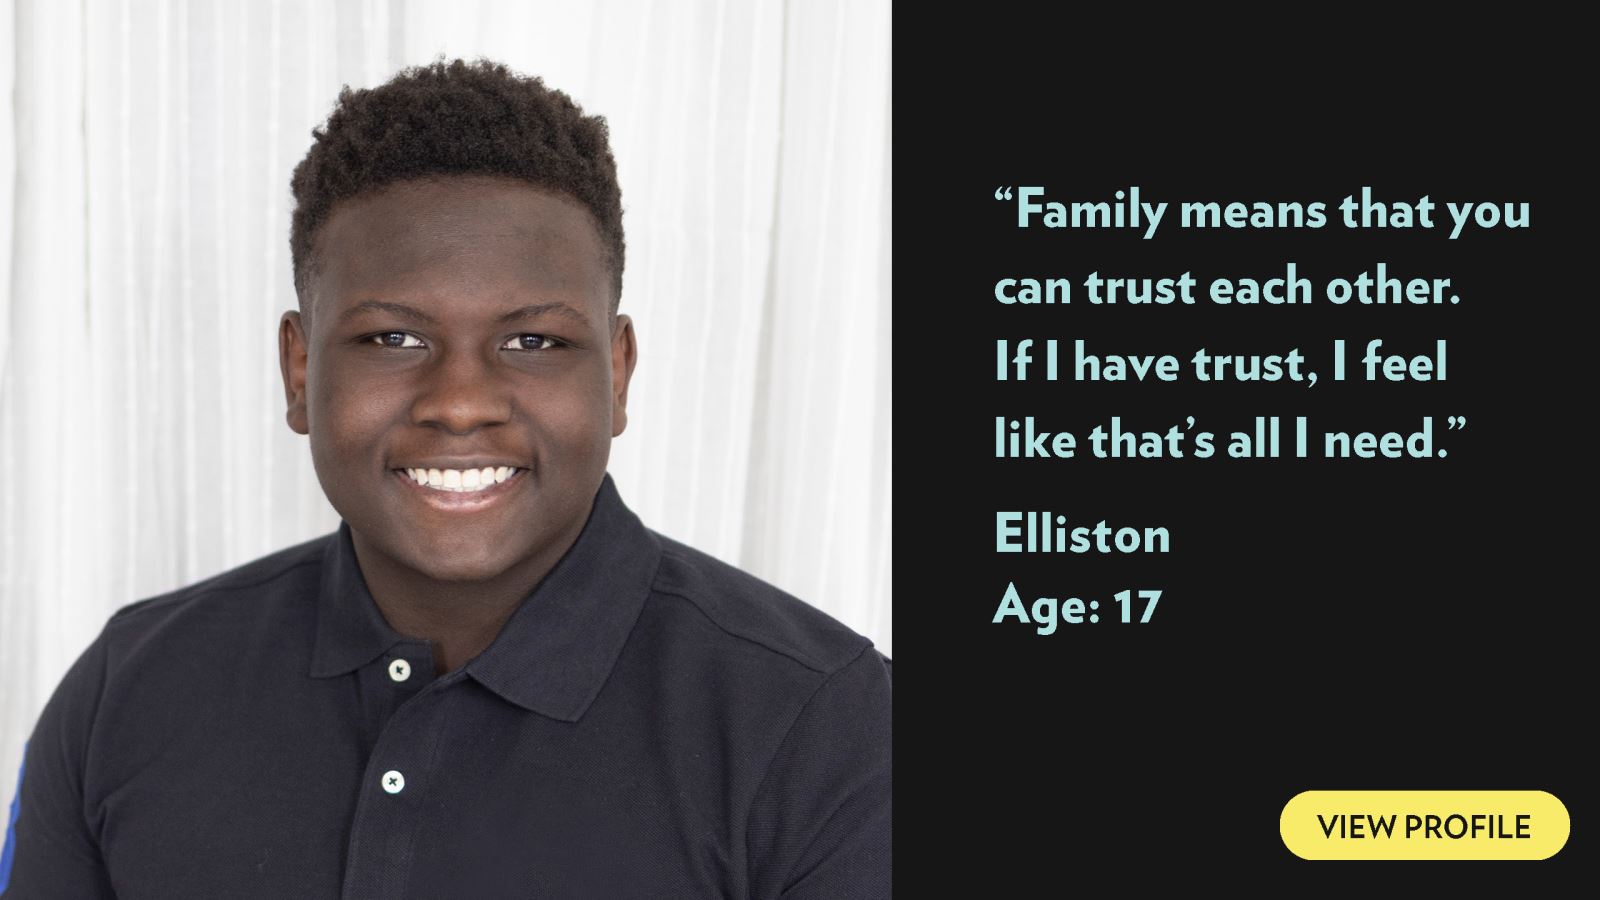 Family means that you can trust each other. If I have trust, I feel like that’s all I need. Elliston, age 17. View profile.